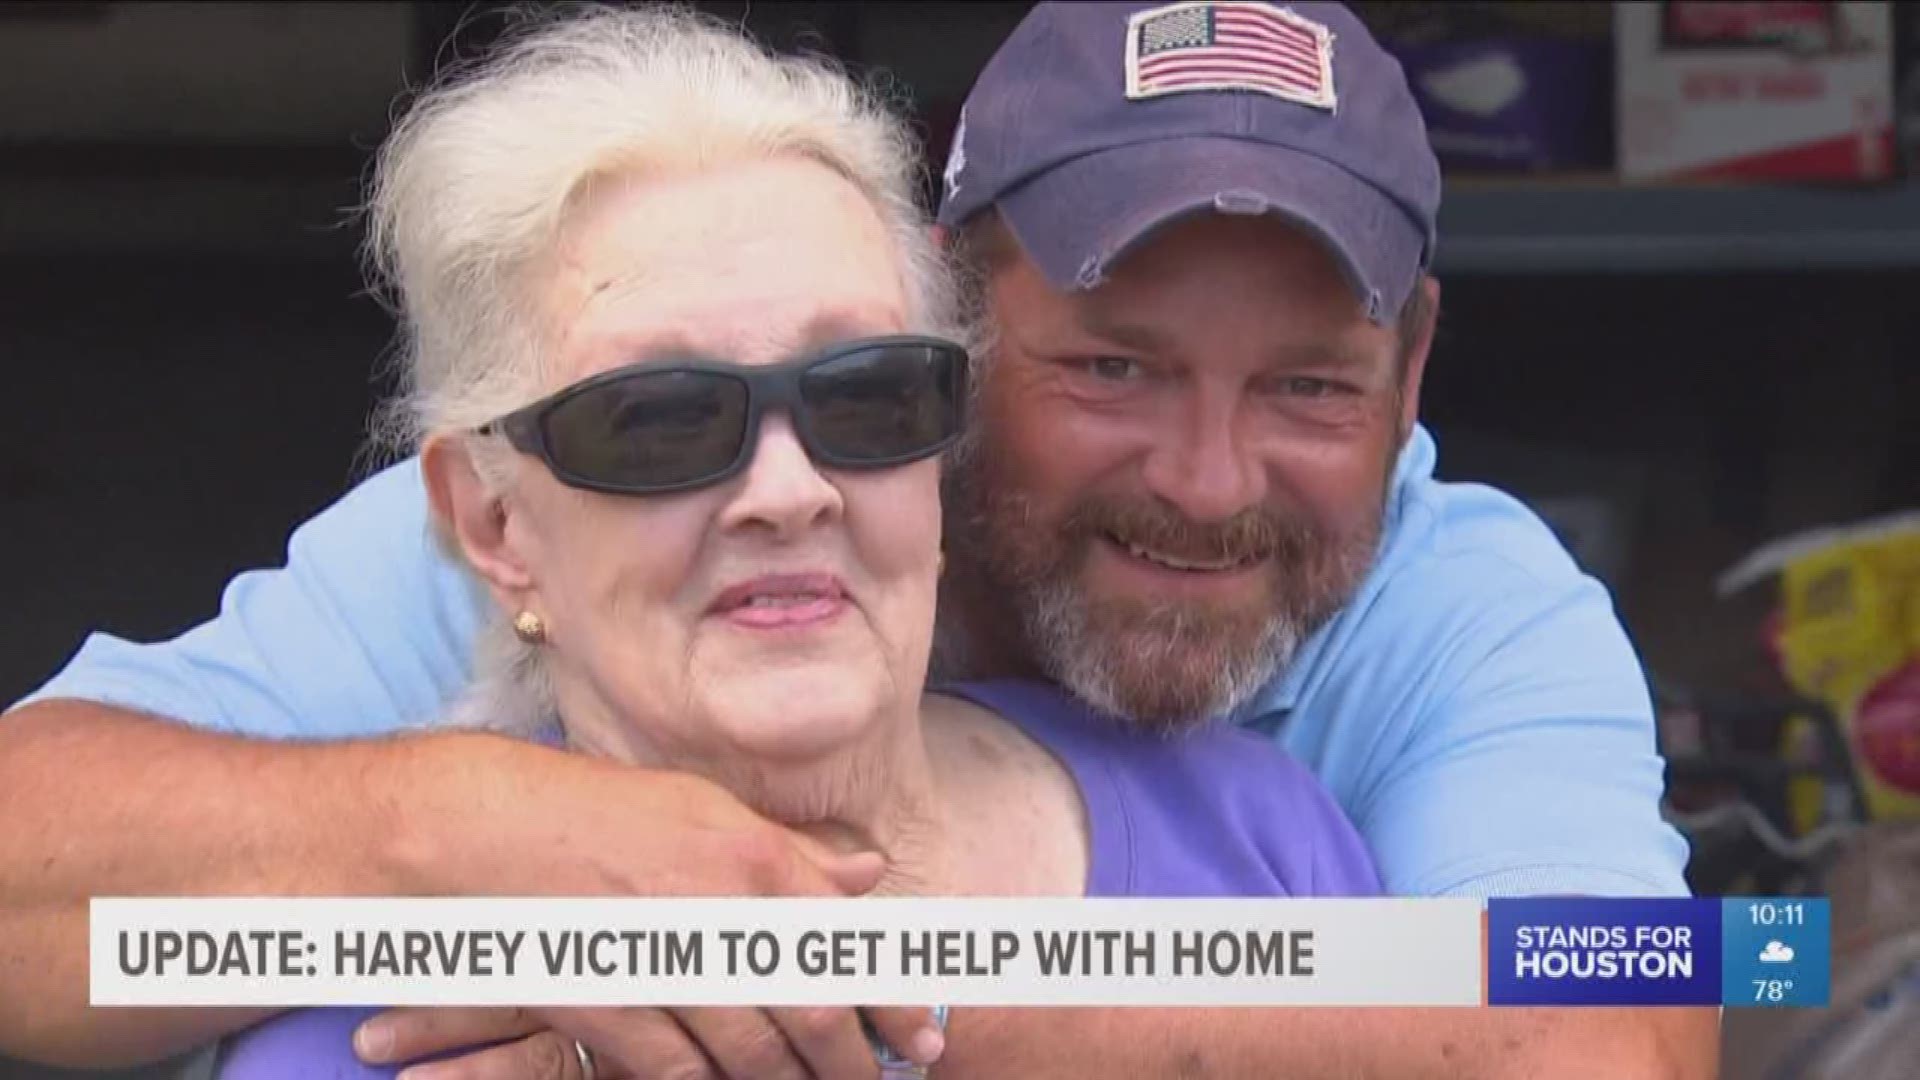 Someone who saw our story wants to help the woman who's been unable to return home after Hurricane Harvey.